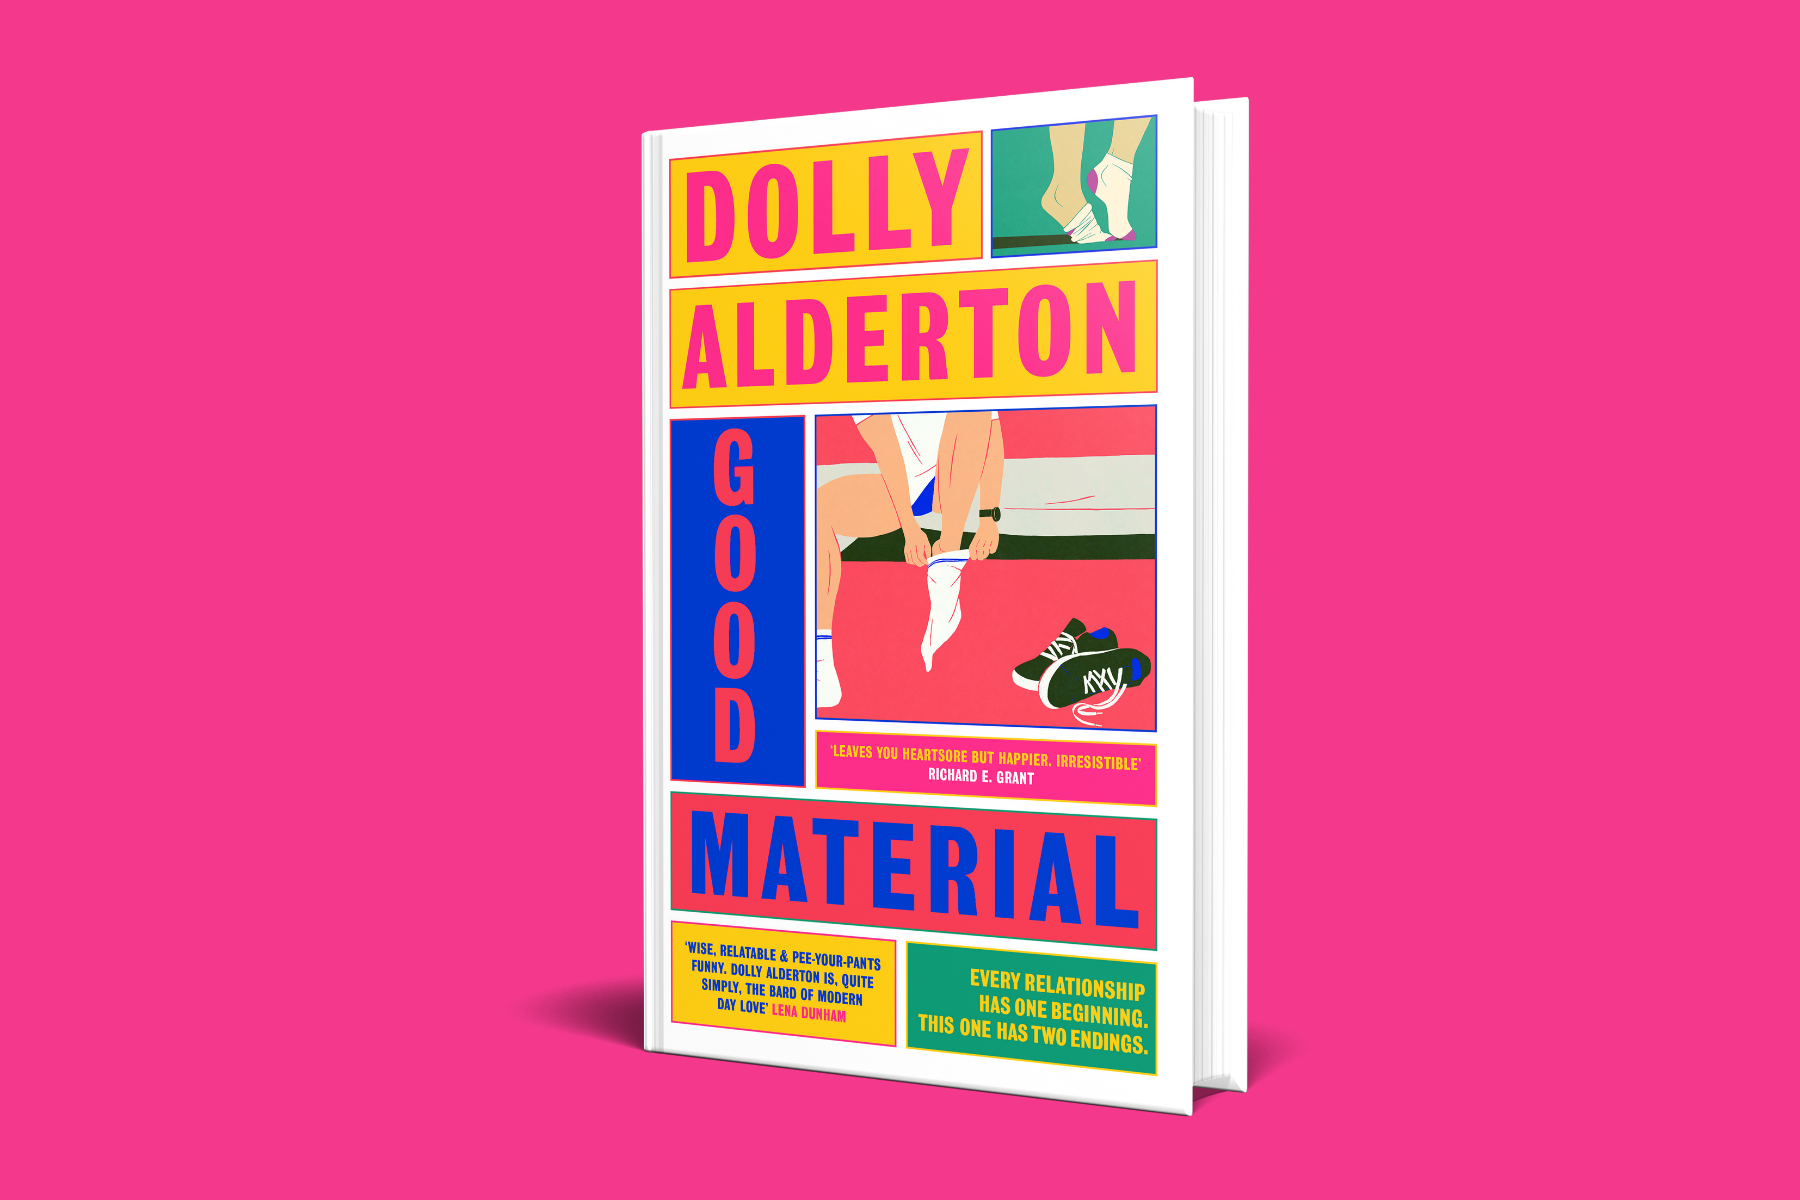 Dolly Alterton's new book Good Material 